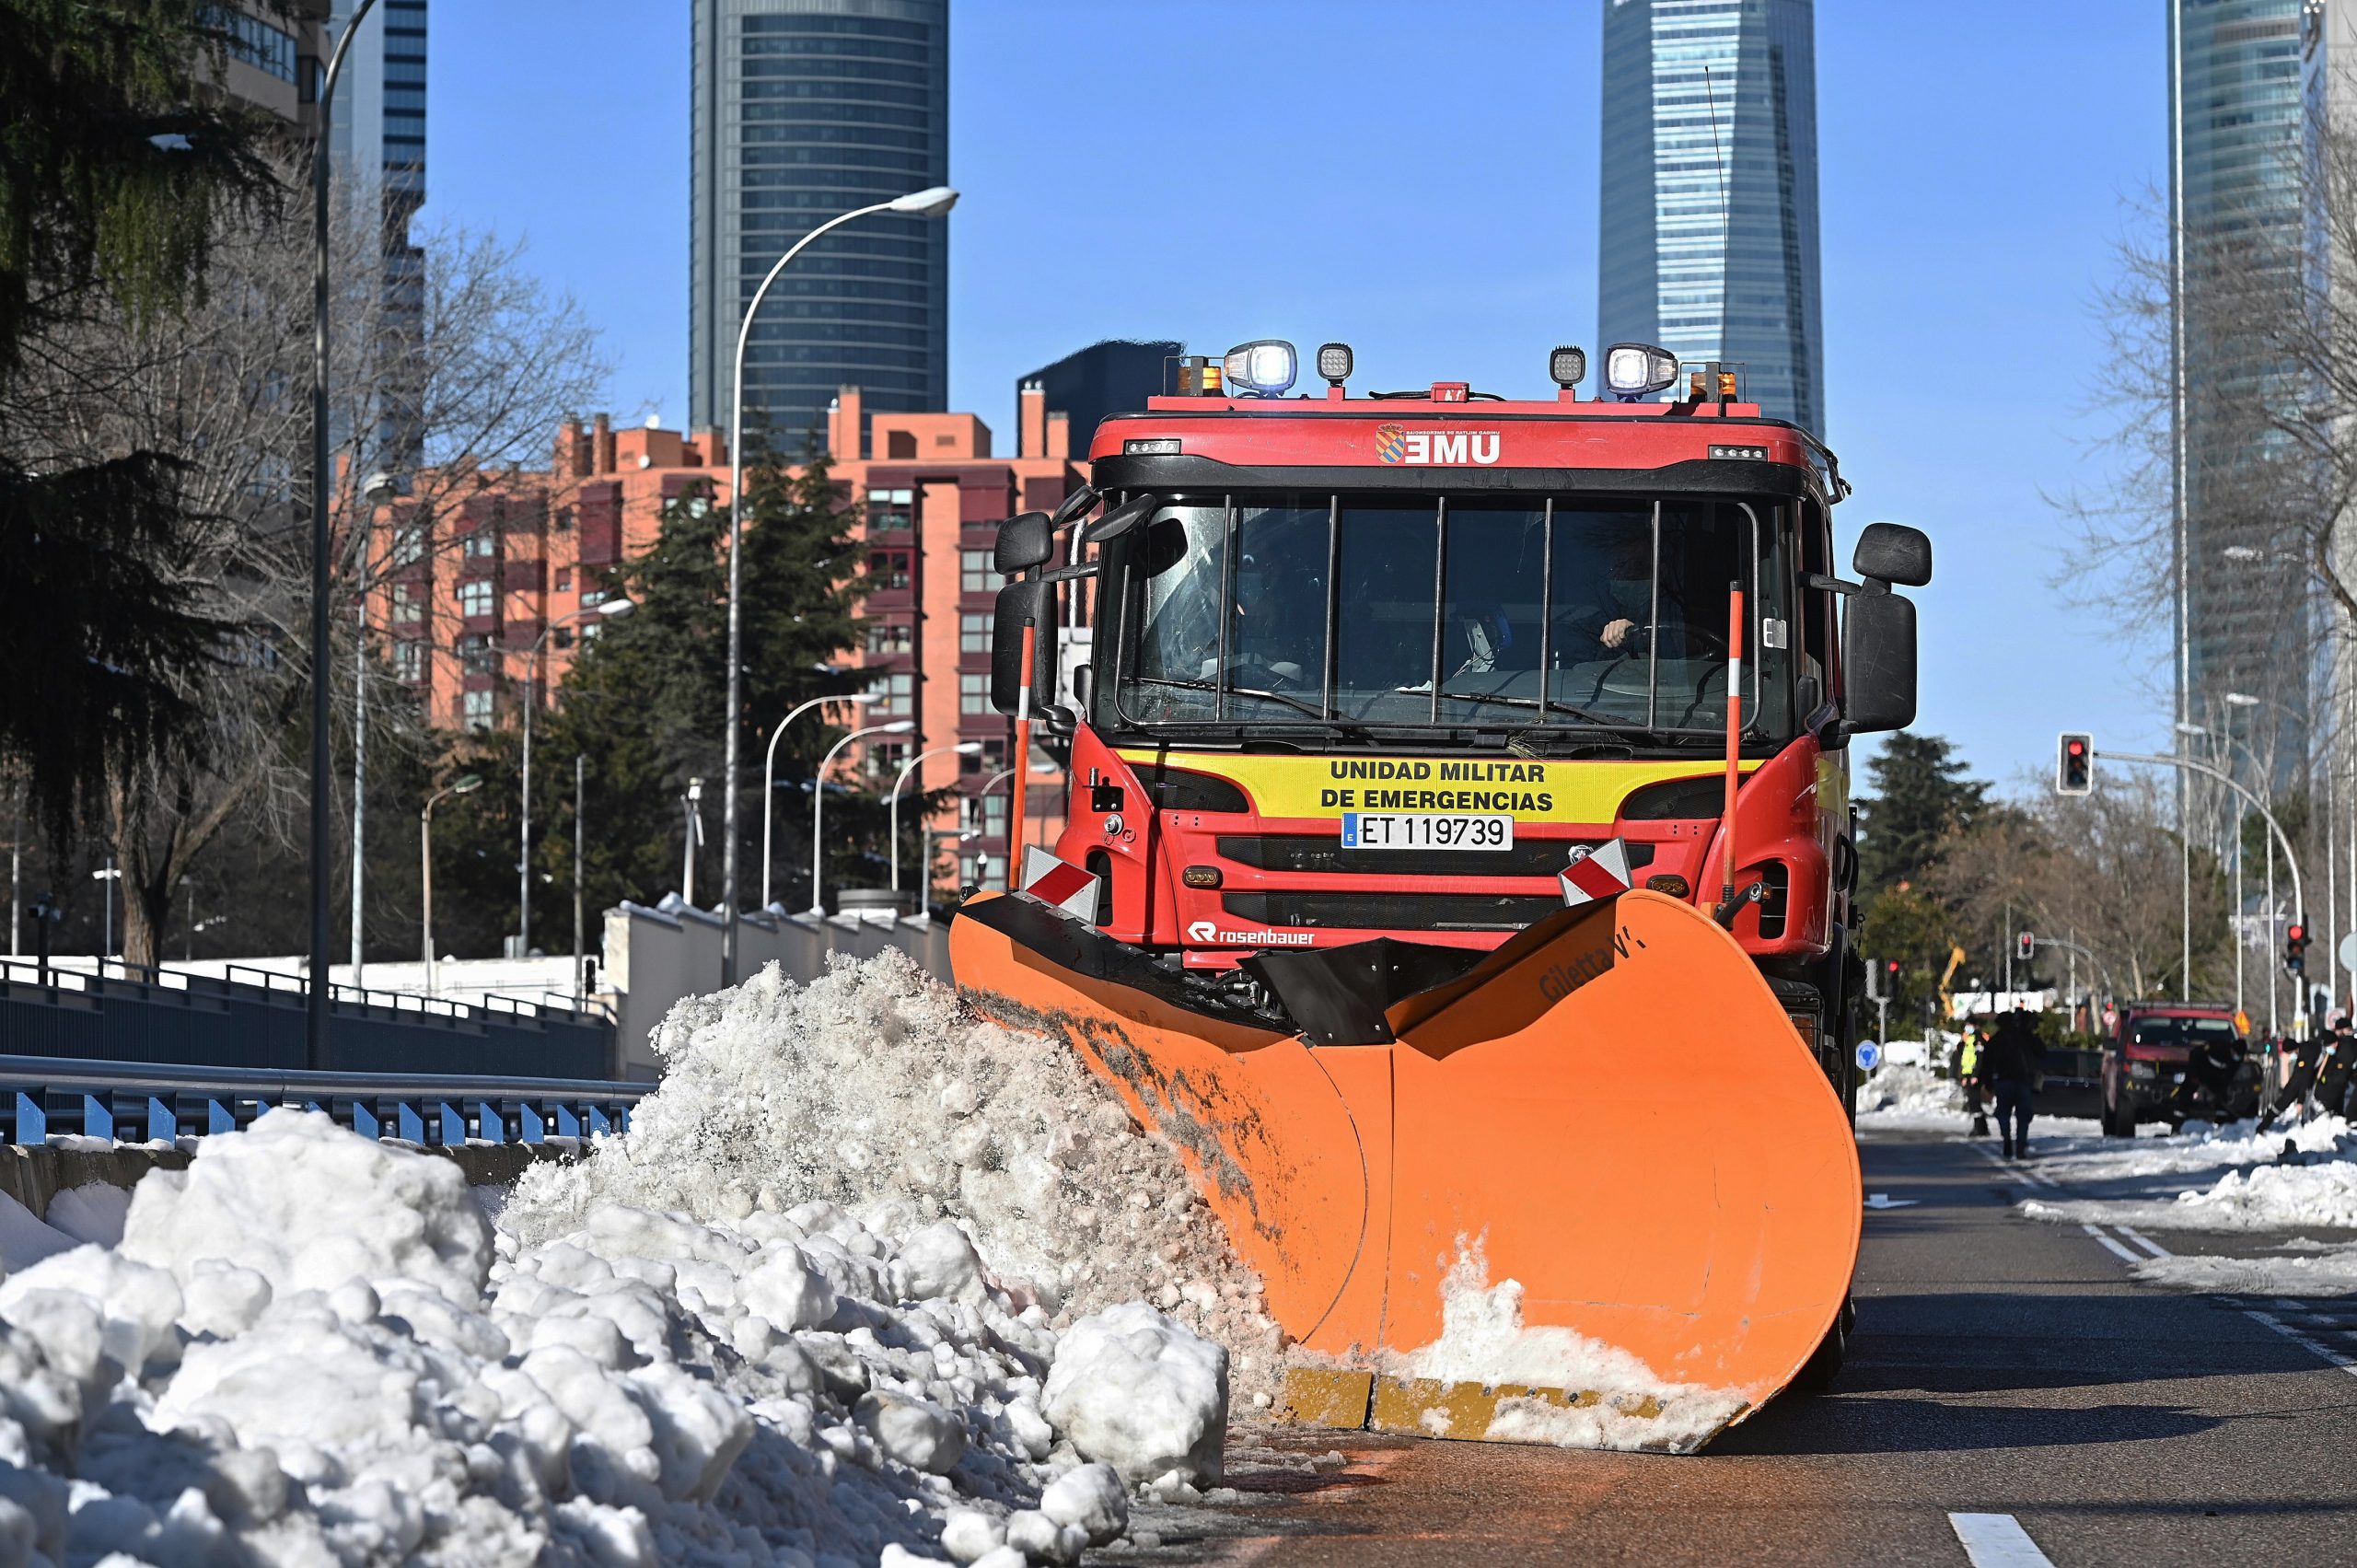 epa08938806 A snowplough from Spain's Military Emergency Unit (UME) cleans a street in downtown Madrid after the heavy snowfall caused by the storm Filomena, during the visit of the Minister of Defense, Margarita Robles (not pictured) to the area, in Madrid, Spain, 15 January 2021.  EPA/FERNANDO VILLAR